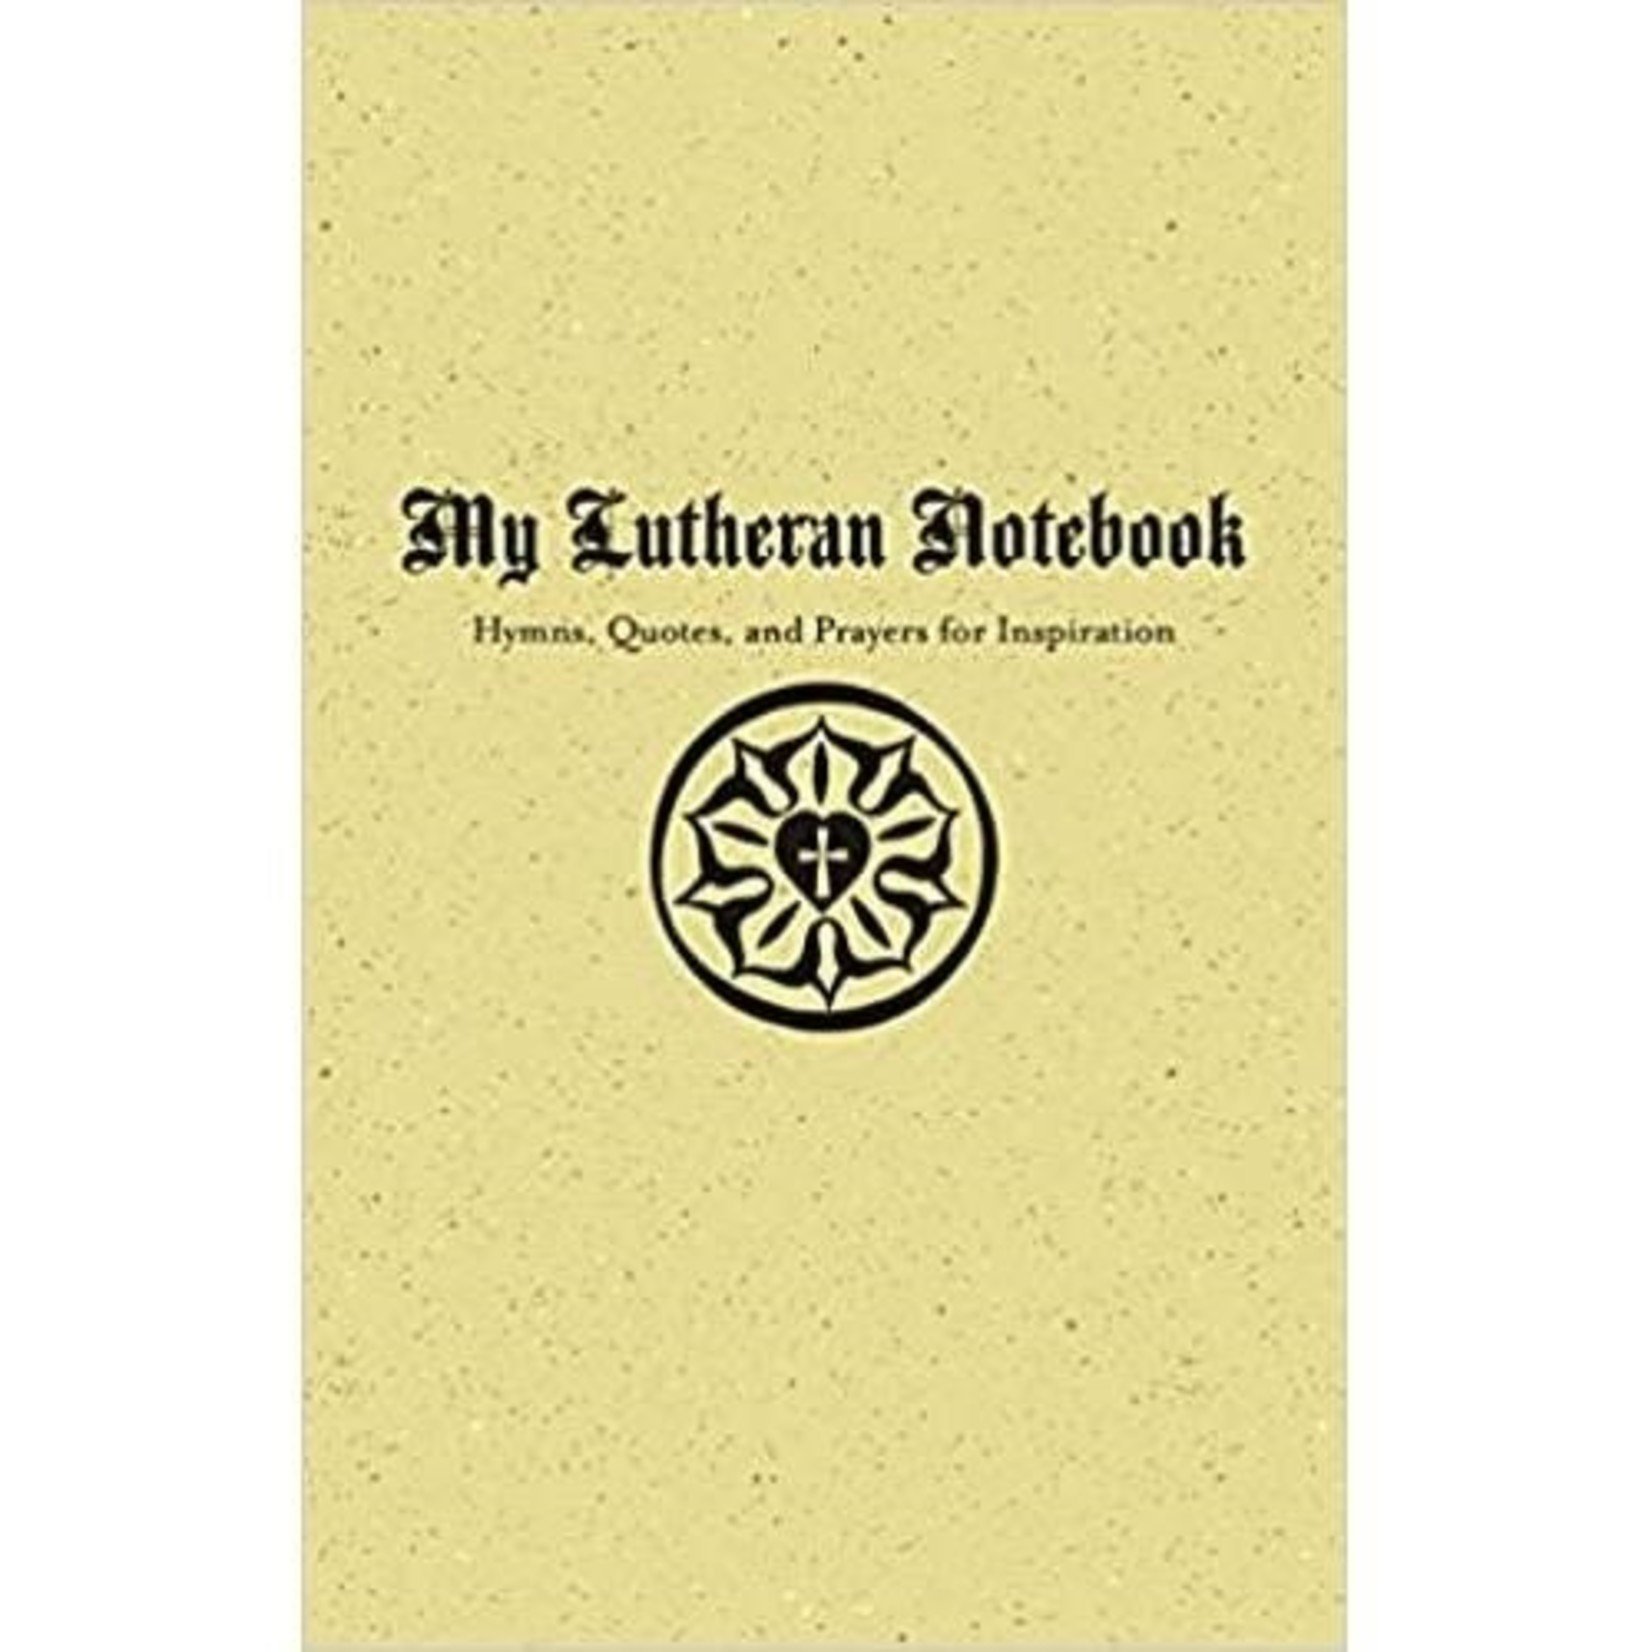 Concordia Publishing House My Lutheran Notebook – Hymns, Quotes, and Prayers for Inspiration